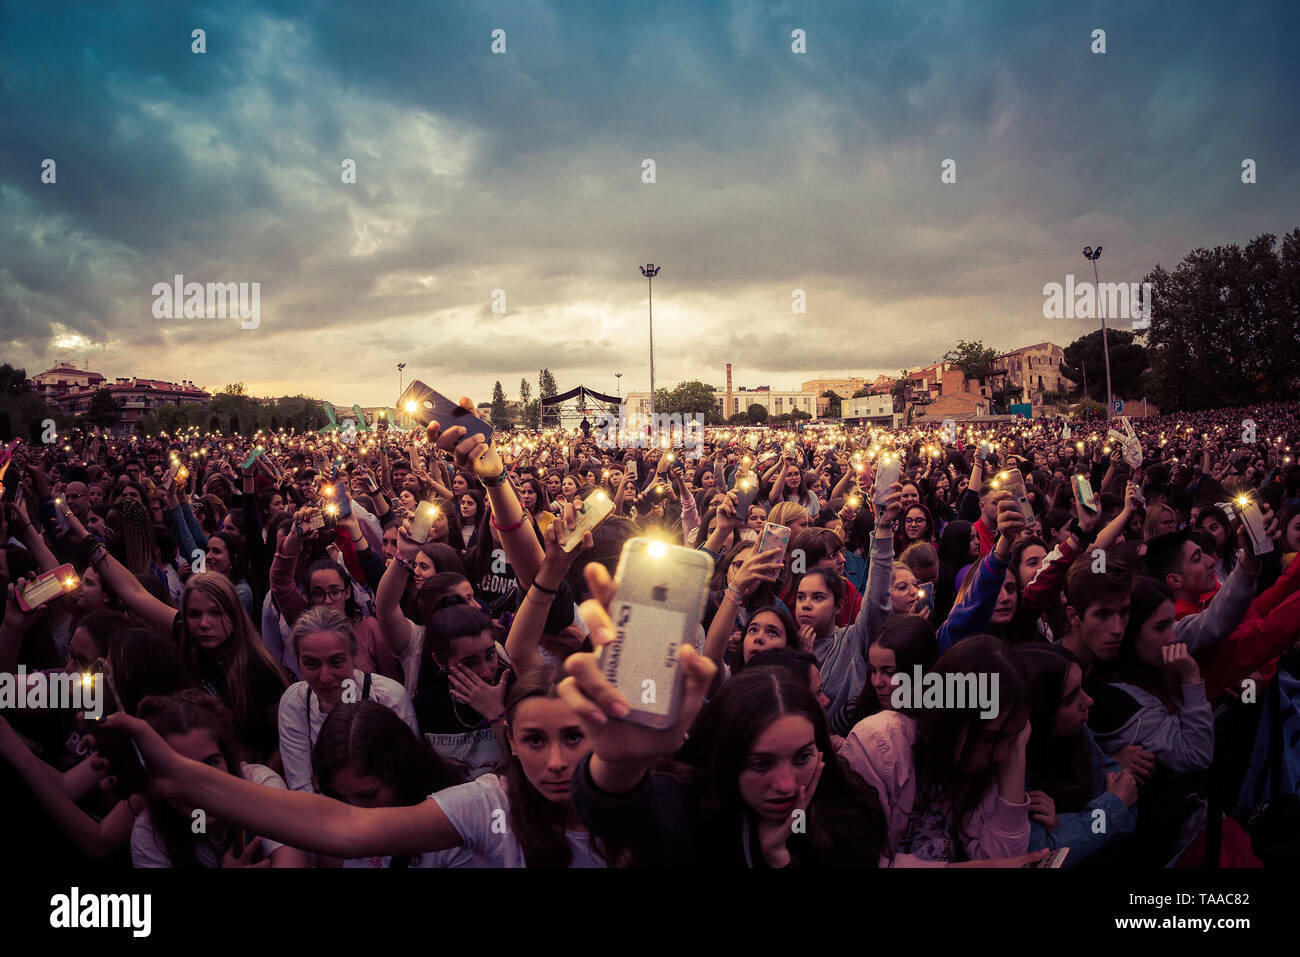 BARCELONA - MAY 18: The crowd with their phones up in a concert at Primavera Pop Festival on May 18, 2019 in Barcelona, Spain. Stock Photo